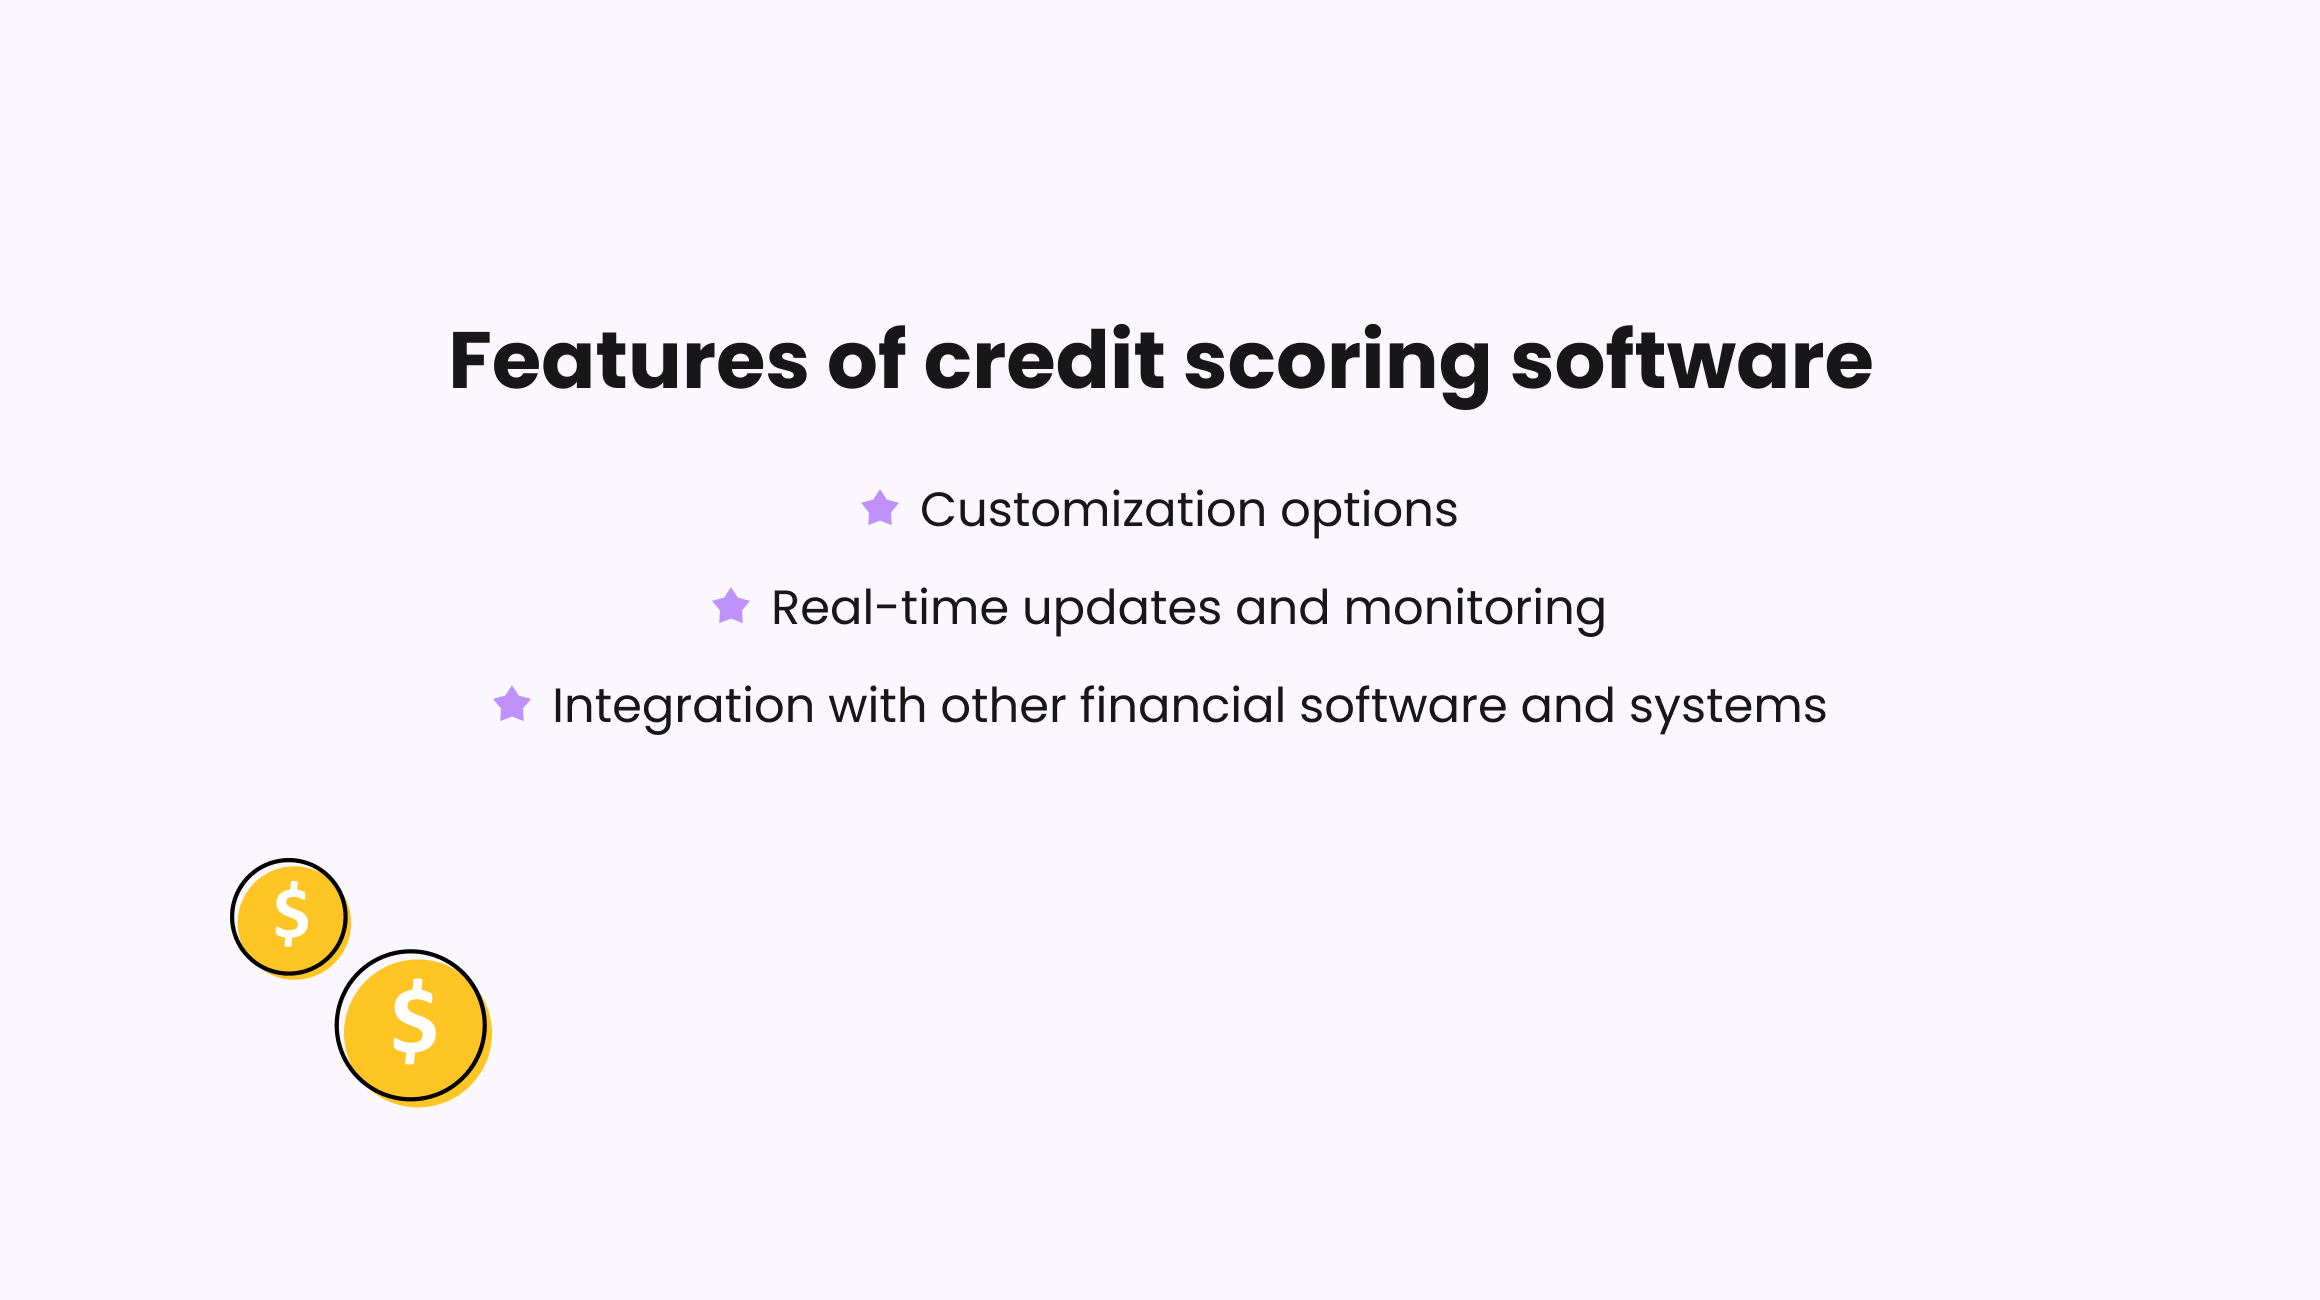 Features of credit scoring software